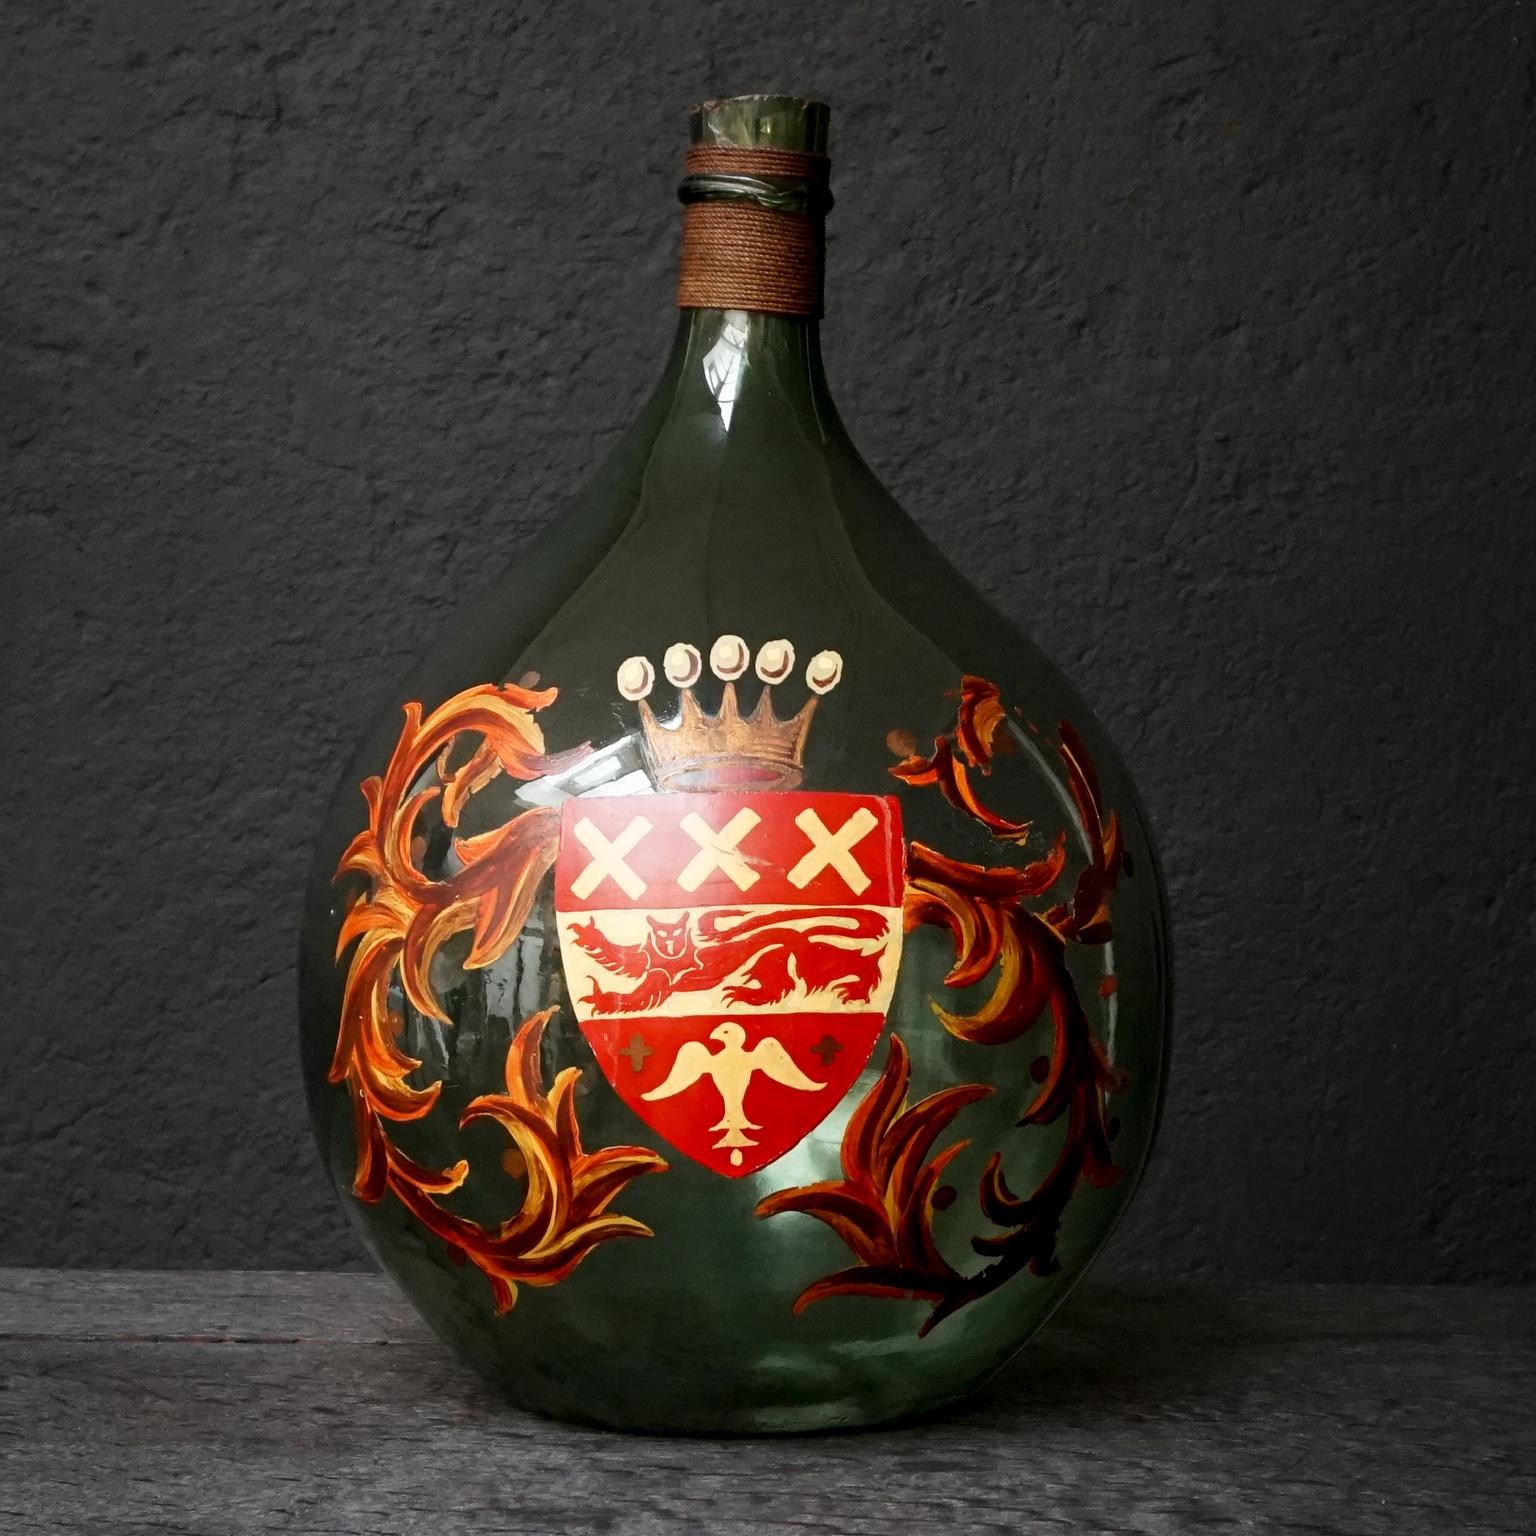 European Set of Two 19th Century Large Handblown Demijohns with Painted Coat of Arms